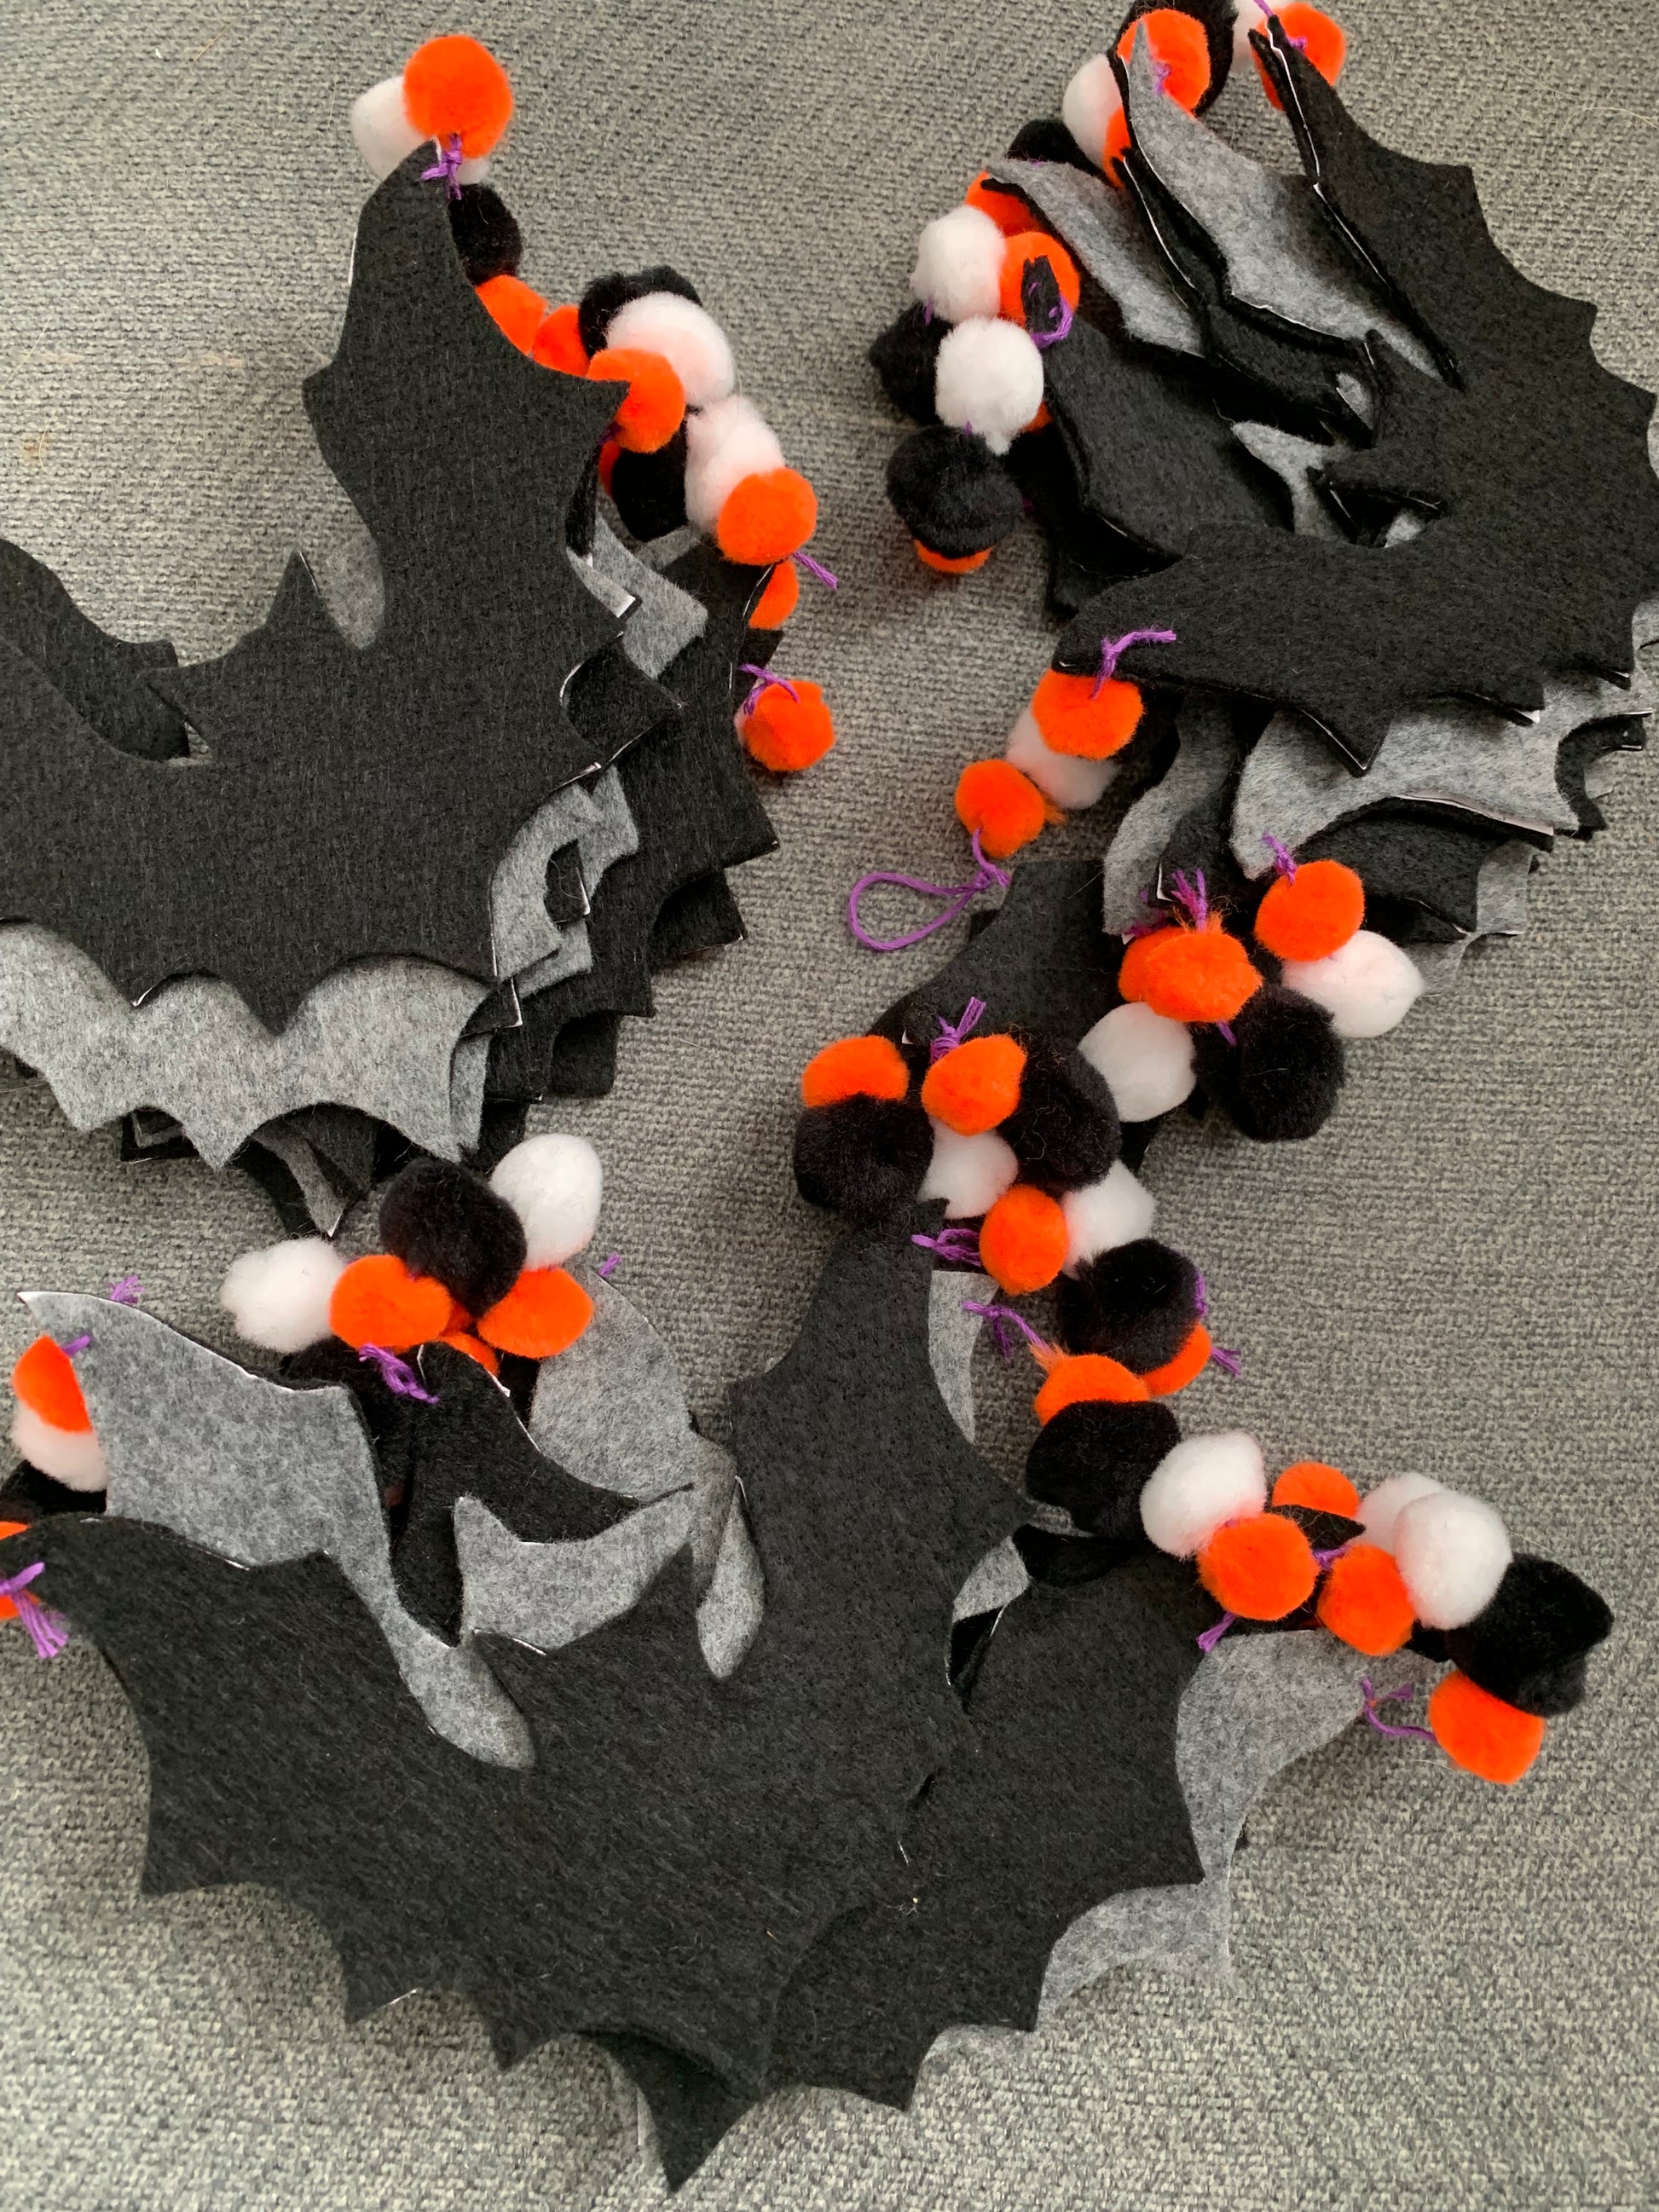 black felt garlands, in a pile, you can see the grey backing of some of the bats. bright orange, white, and black pom poms, and a purple embroidery thread to complete the Halloween look